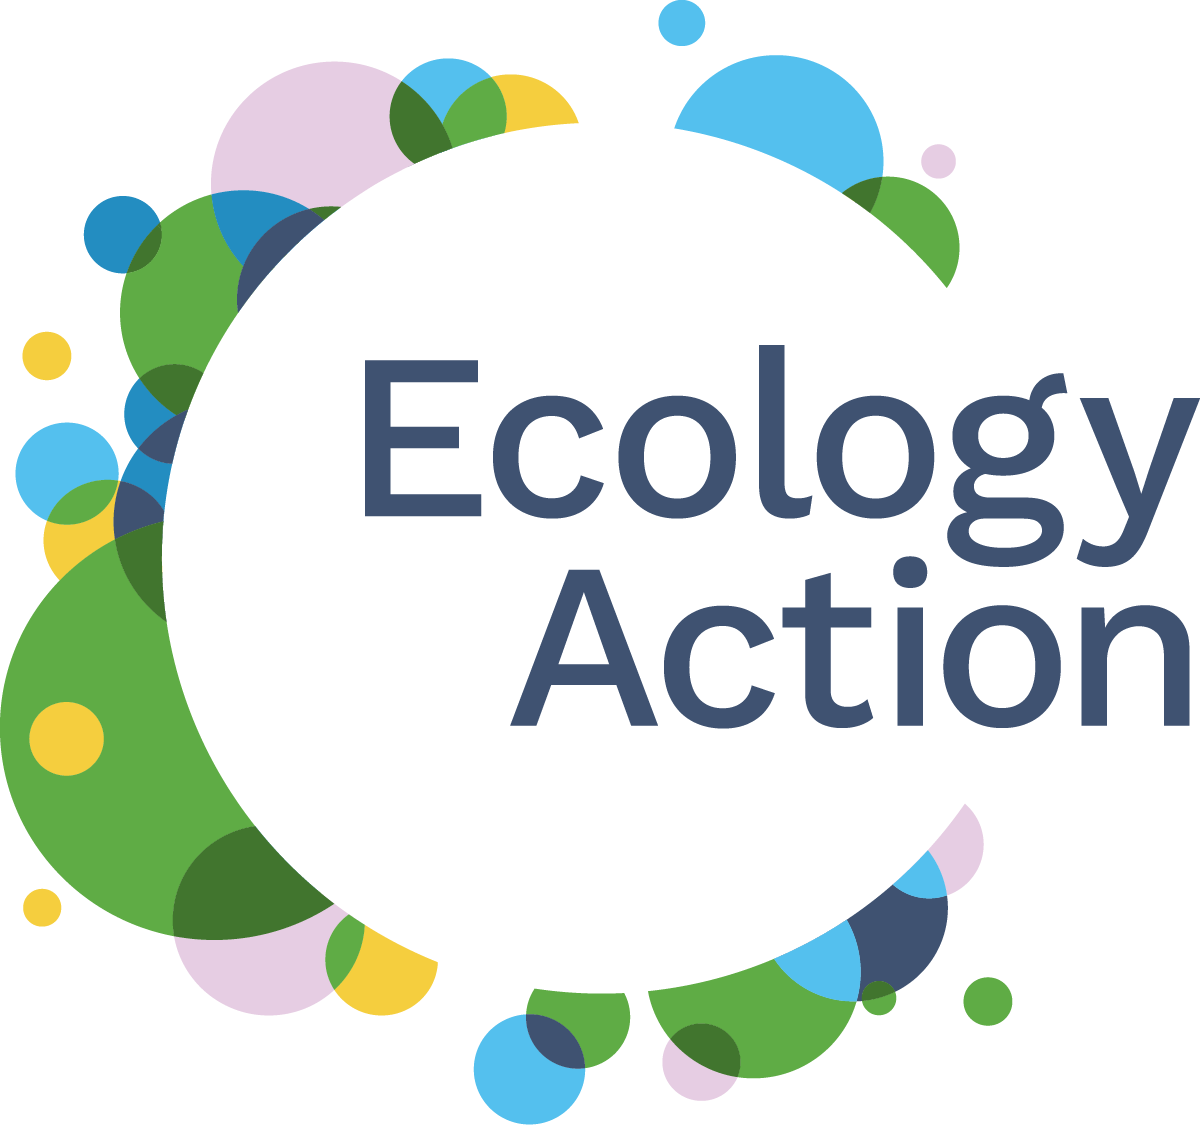 Ecology Action